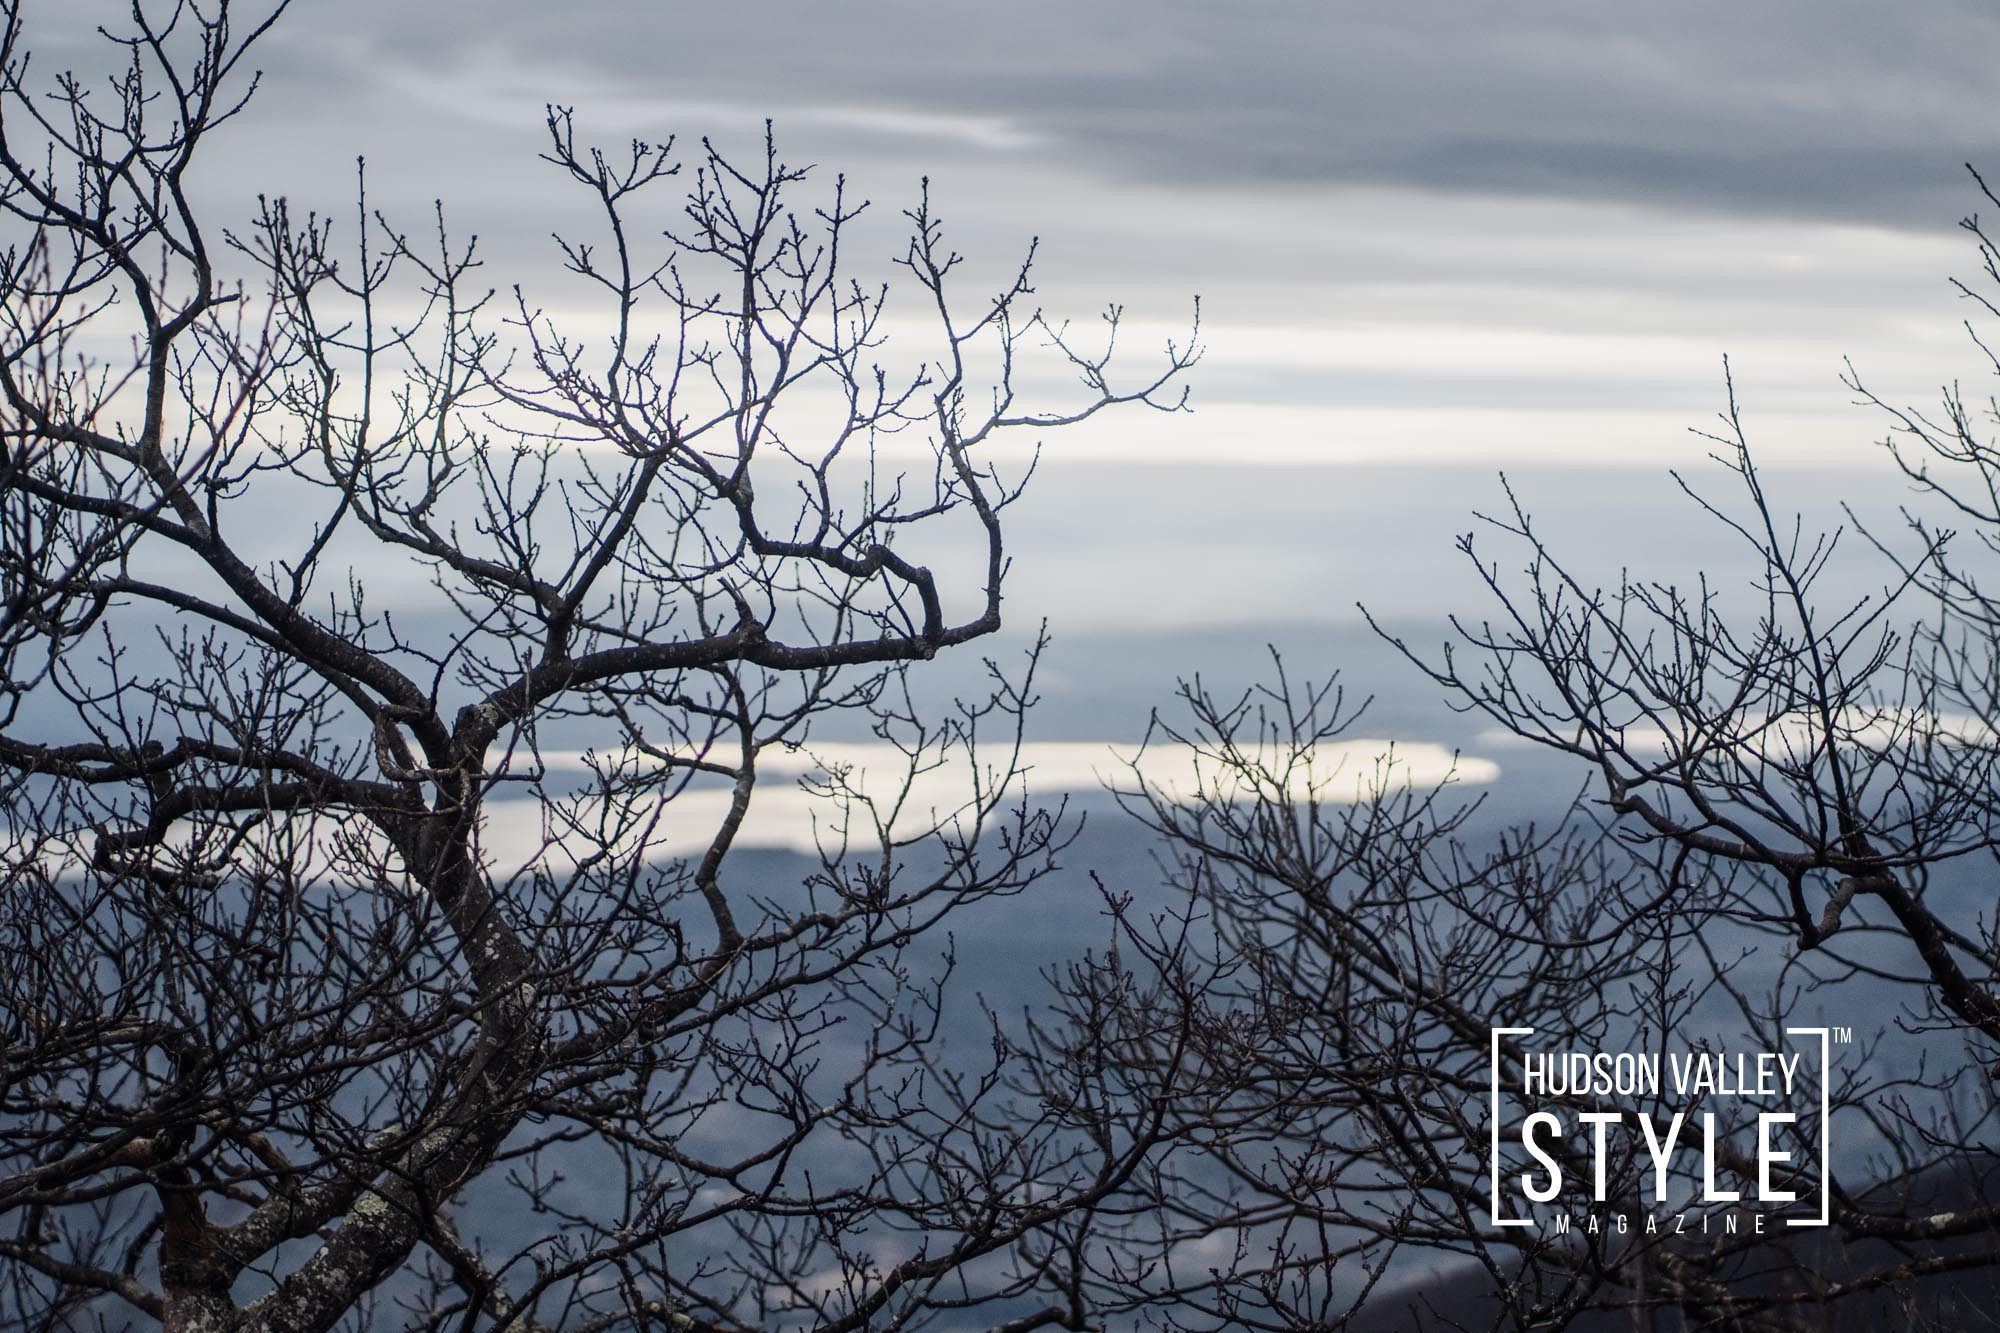 Exploring the Beauty and Mystery of Overlook Mountain in Woodstock: A Photographic Journey with Maxwell Alexander – Hudson Valley and Catskills Hiking Trails